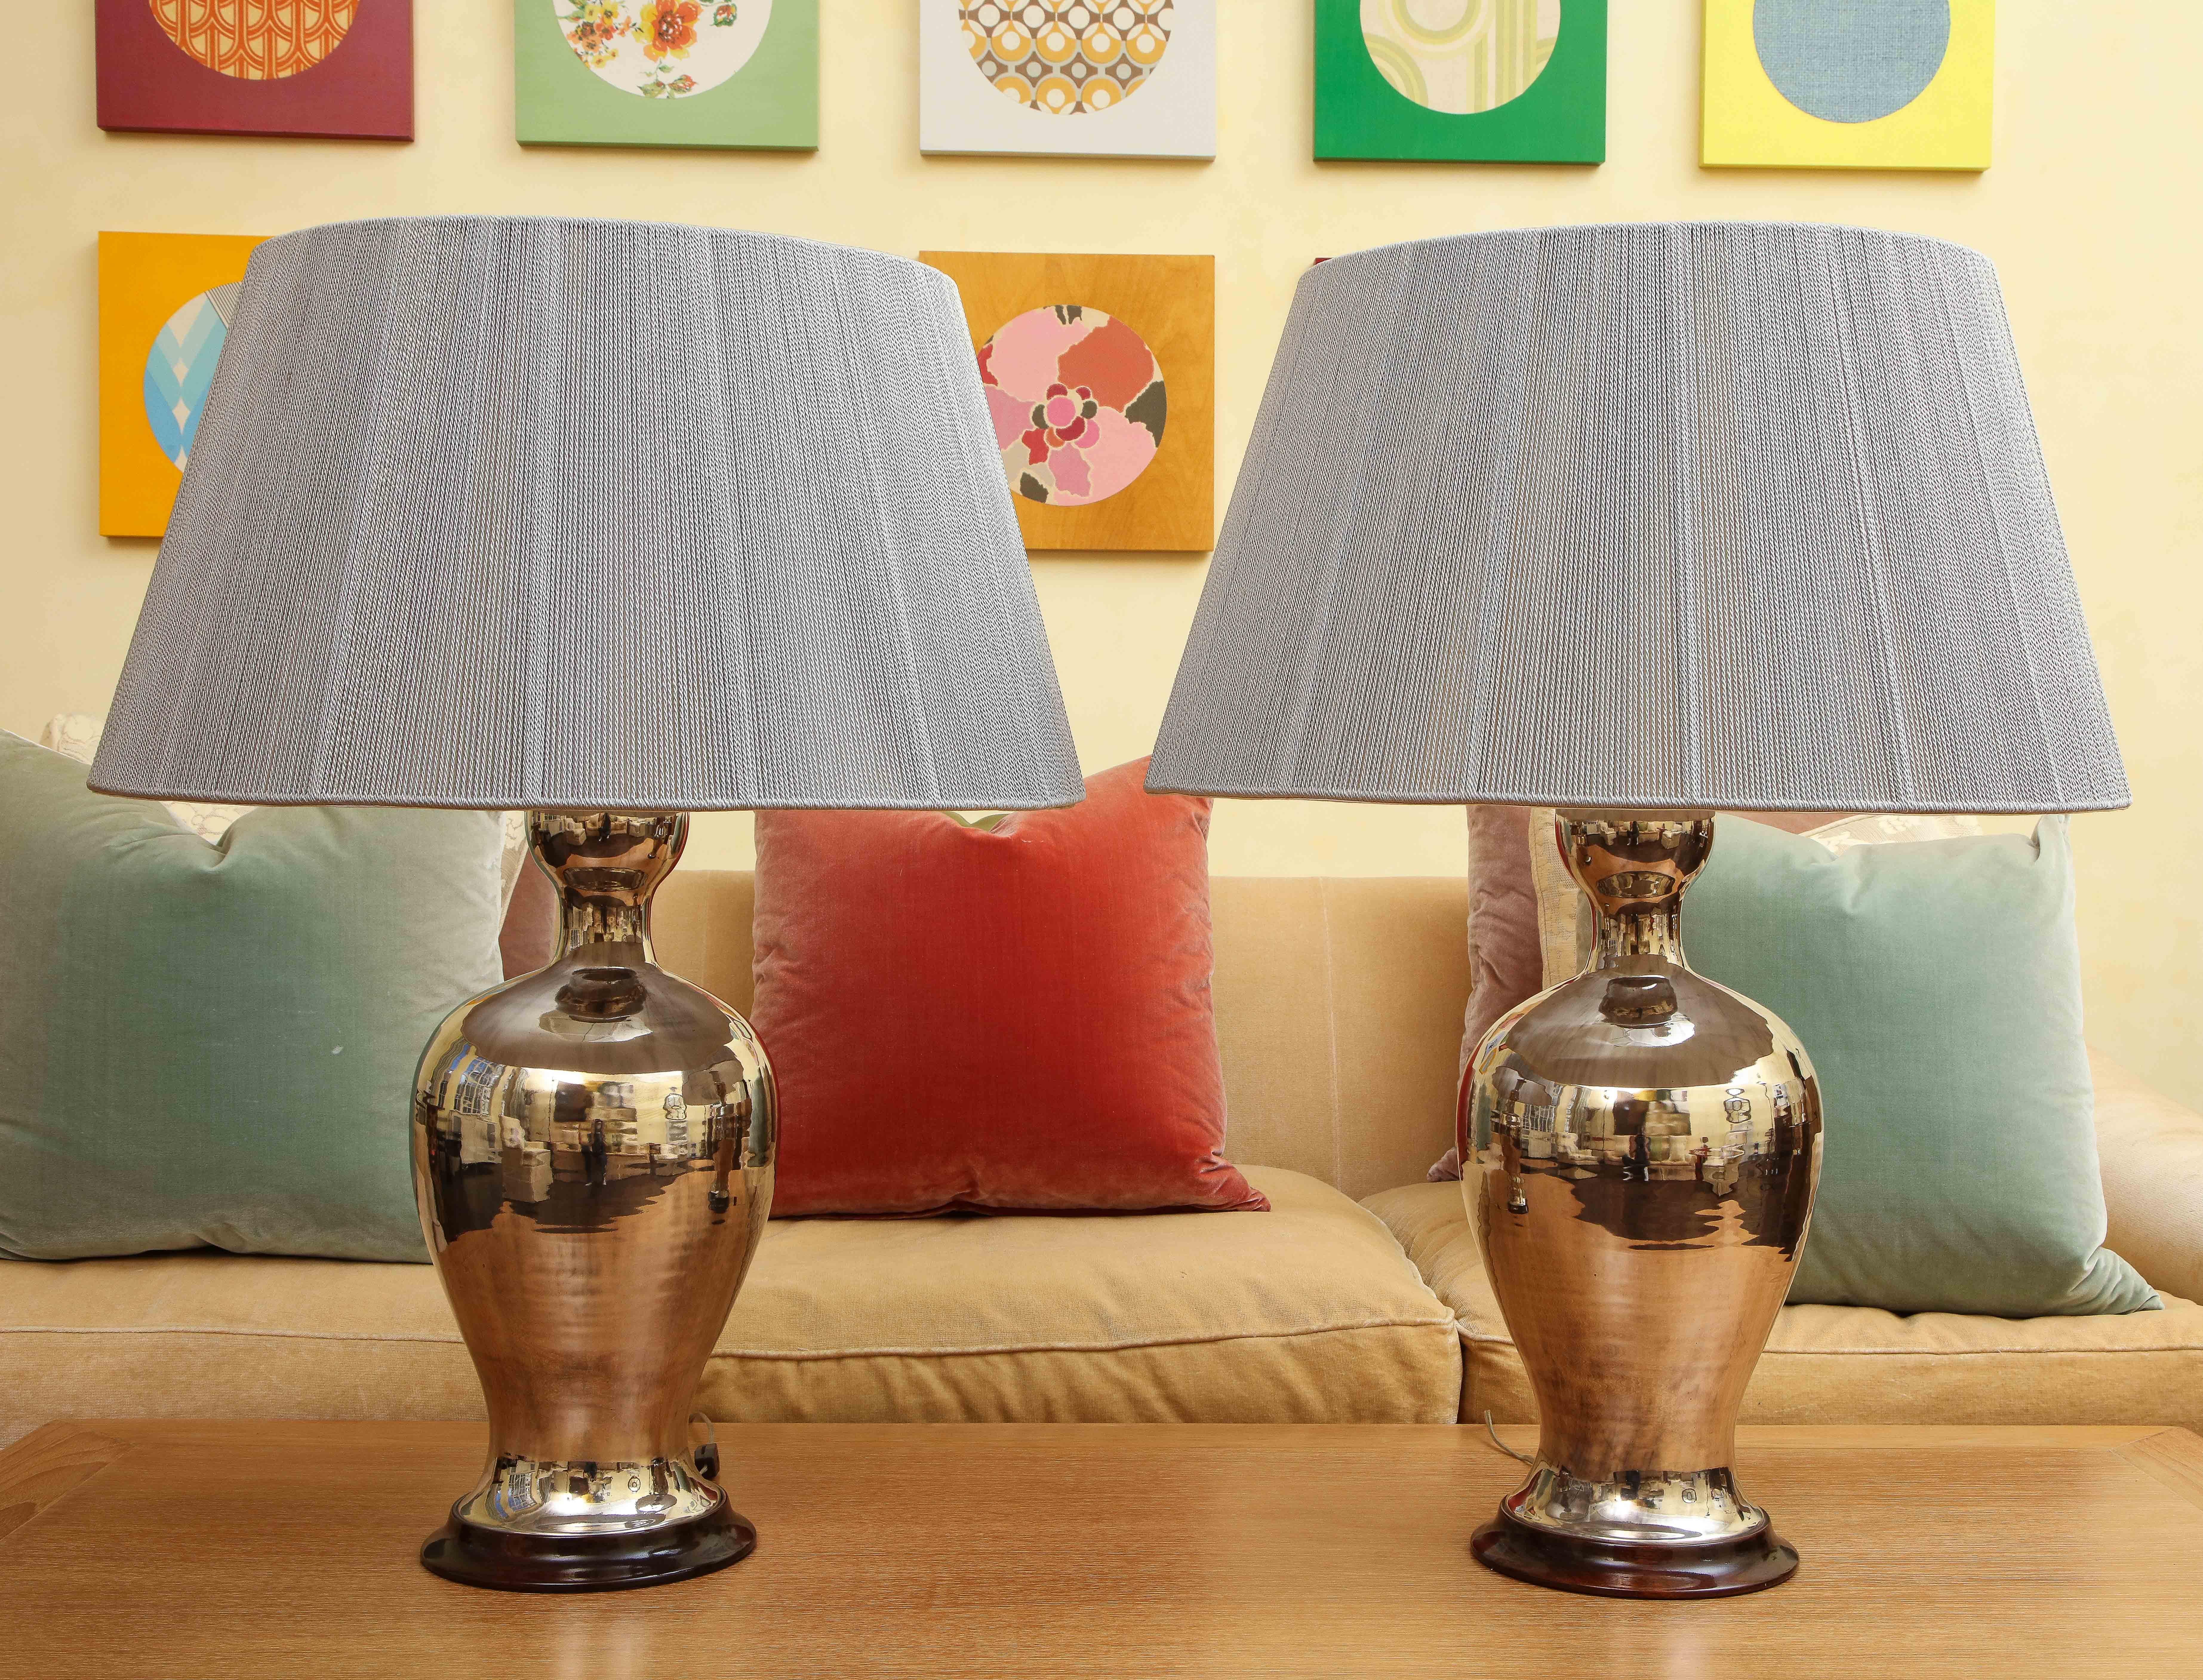 Pair of extra-large custom-made table lamps by Christopher Spitzmiller. Timeless shaped ceramic body with silver lustre glaze and hardwood base. Grey string lamp shades are included, interior torn as shown. Brass double socket, wired for USA.